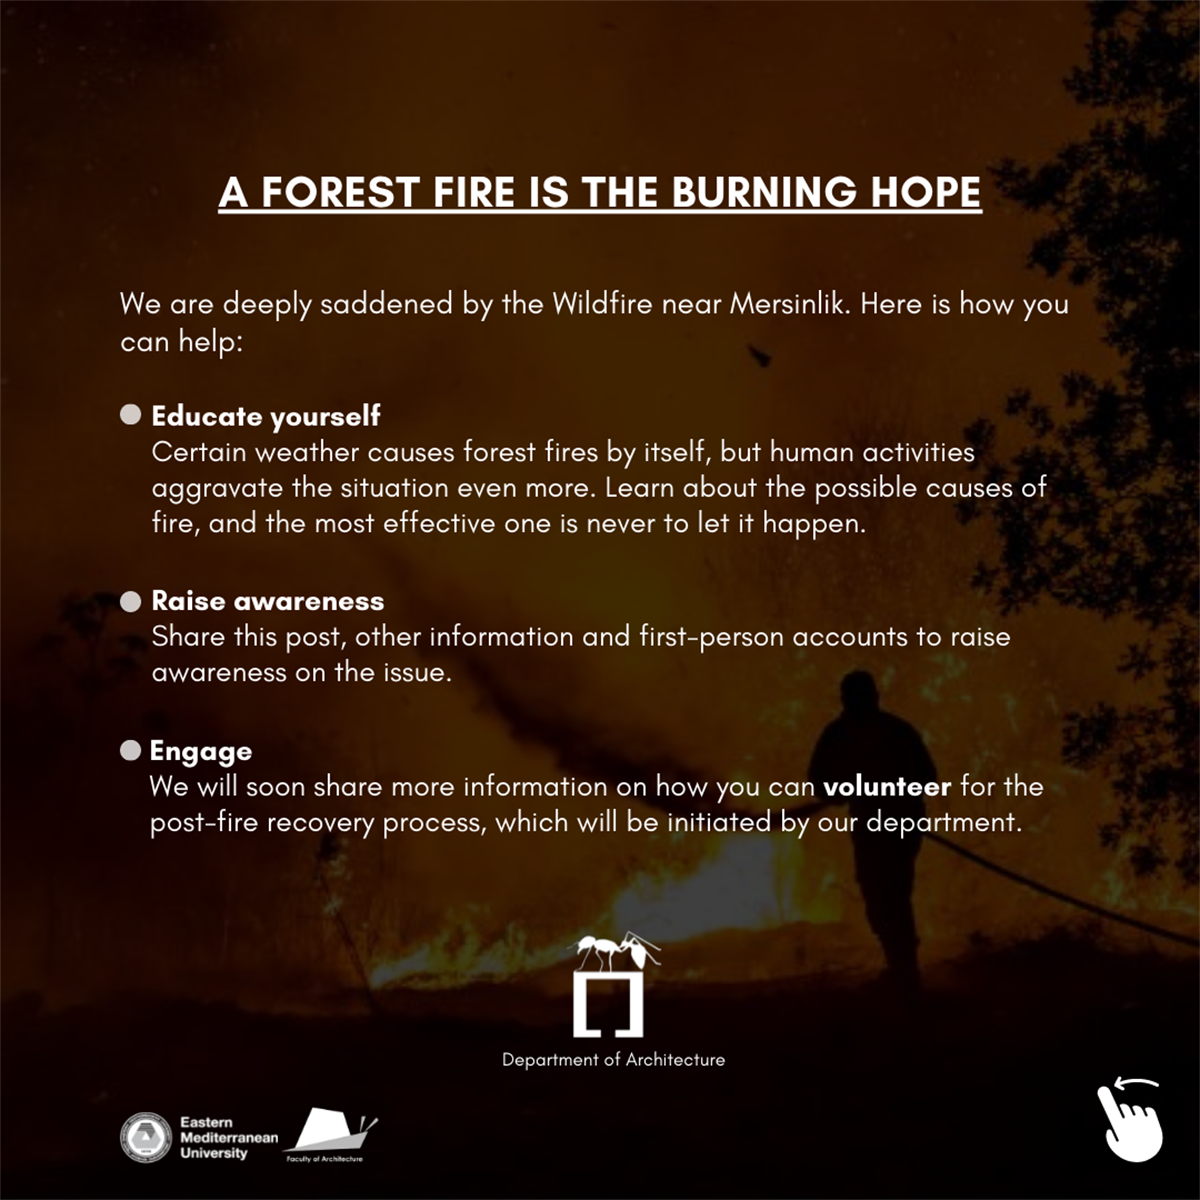 A Forest Fire in Burning Hope 